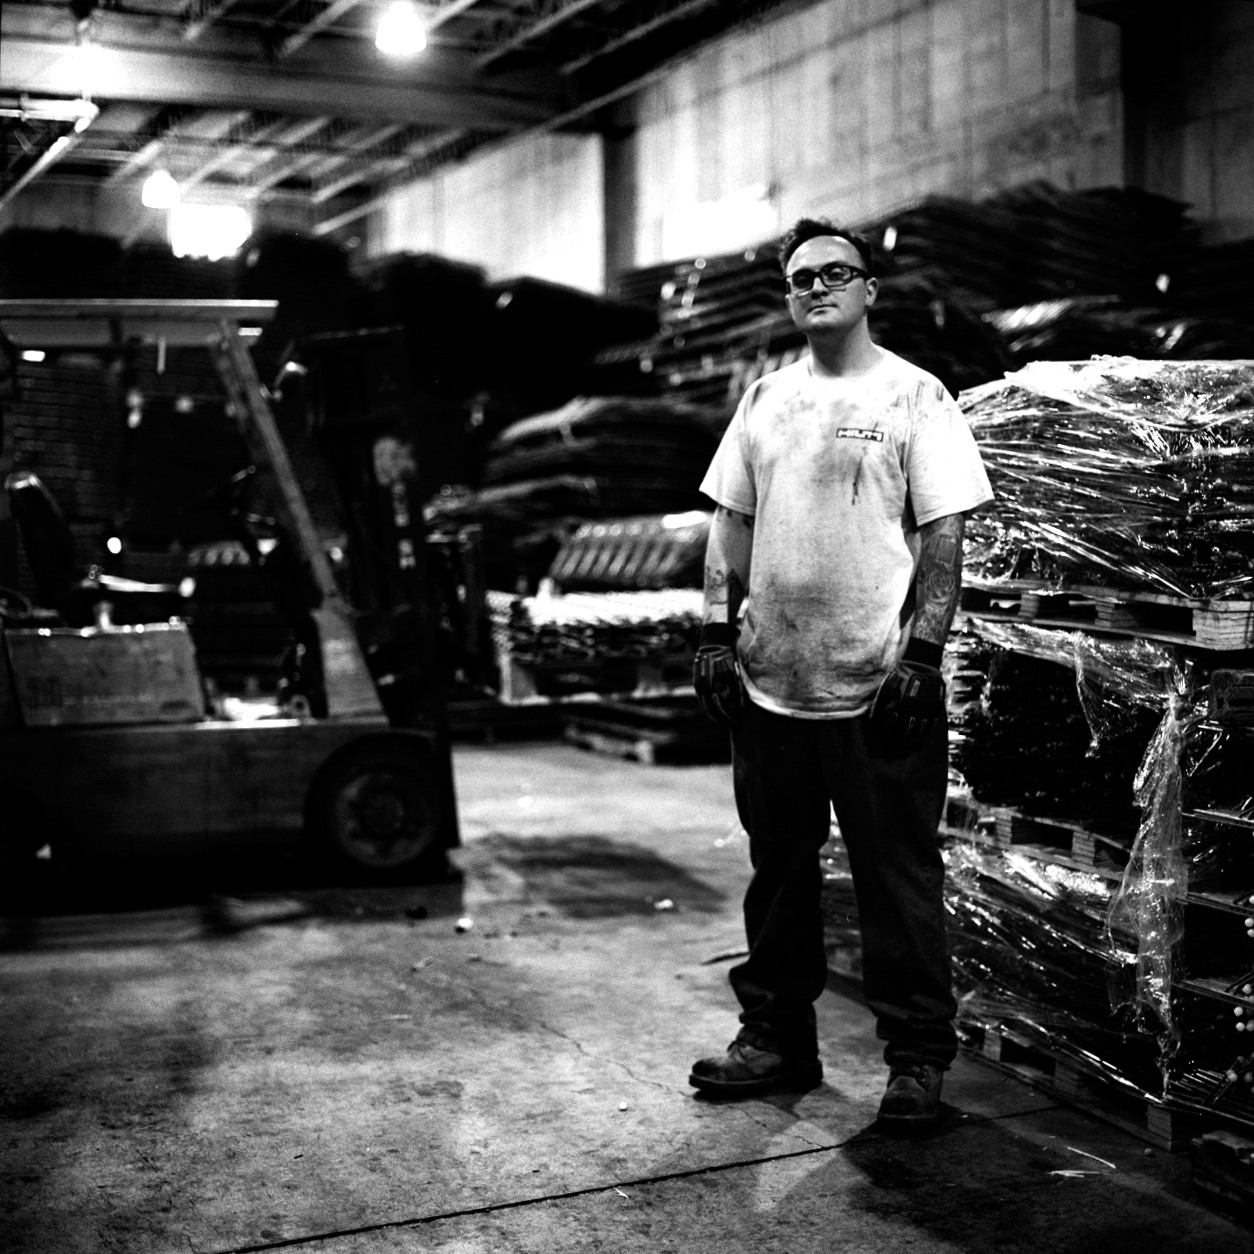  David Goldsmith standing before the sea of chairs he organizes daily with his forklift at Reinforcing Supply. When not on the job he plays with his rock band at a variety of venues.  Williamsburg, Brooklyn, NY (July 2016) 